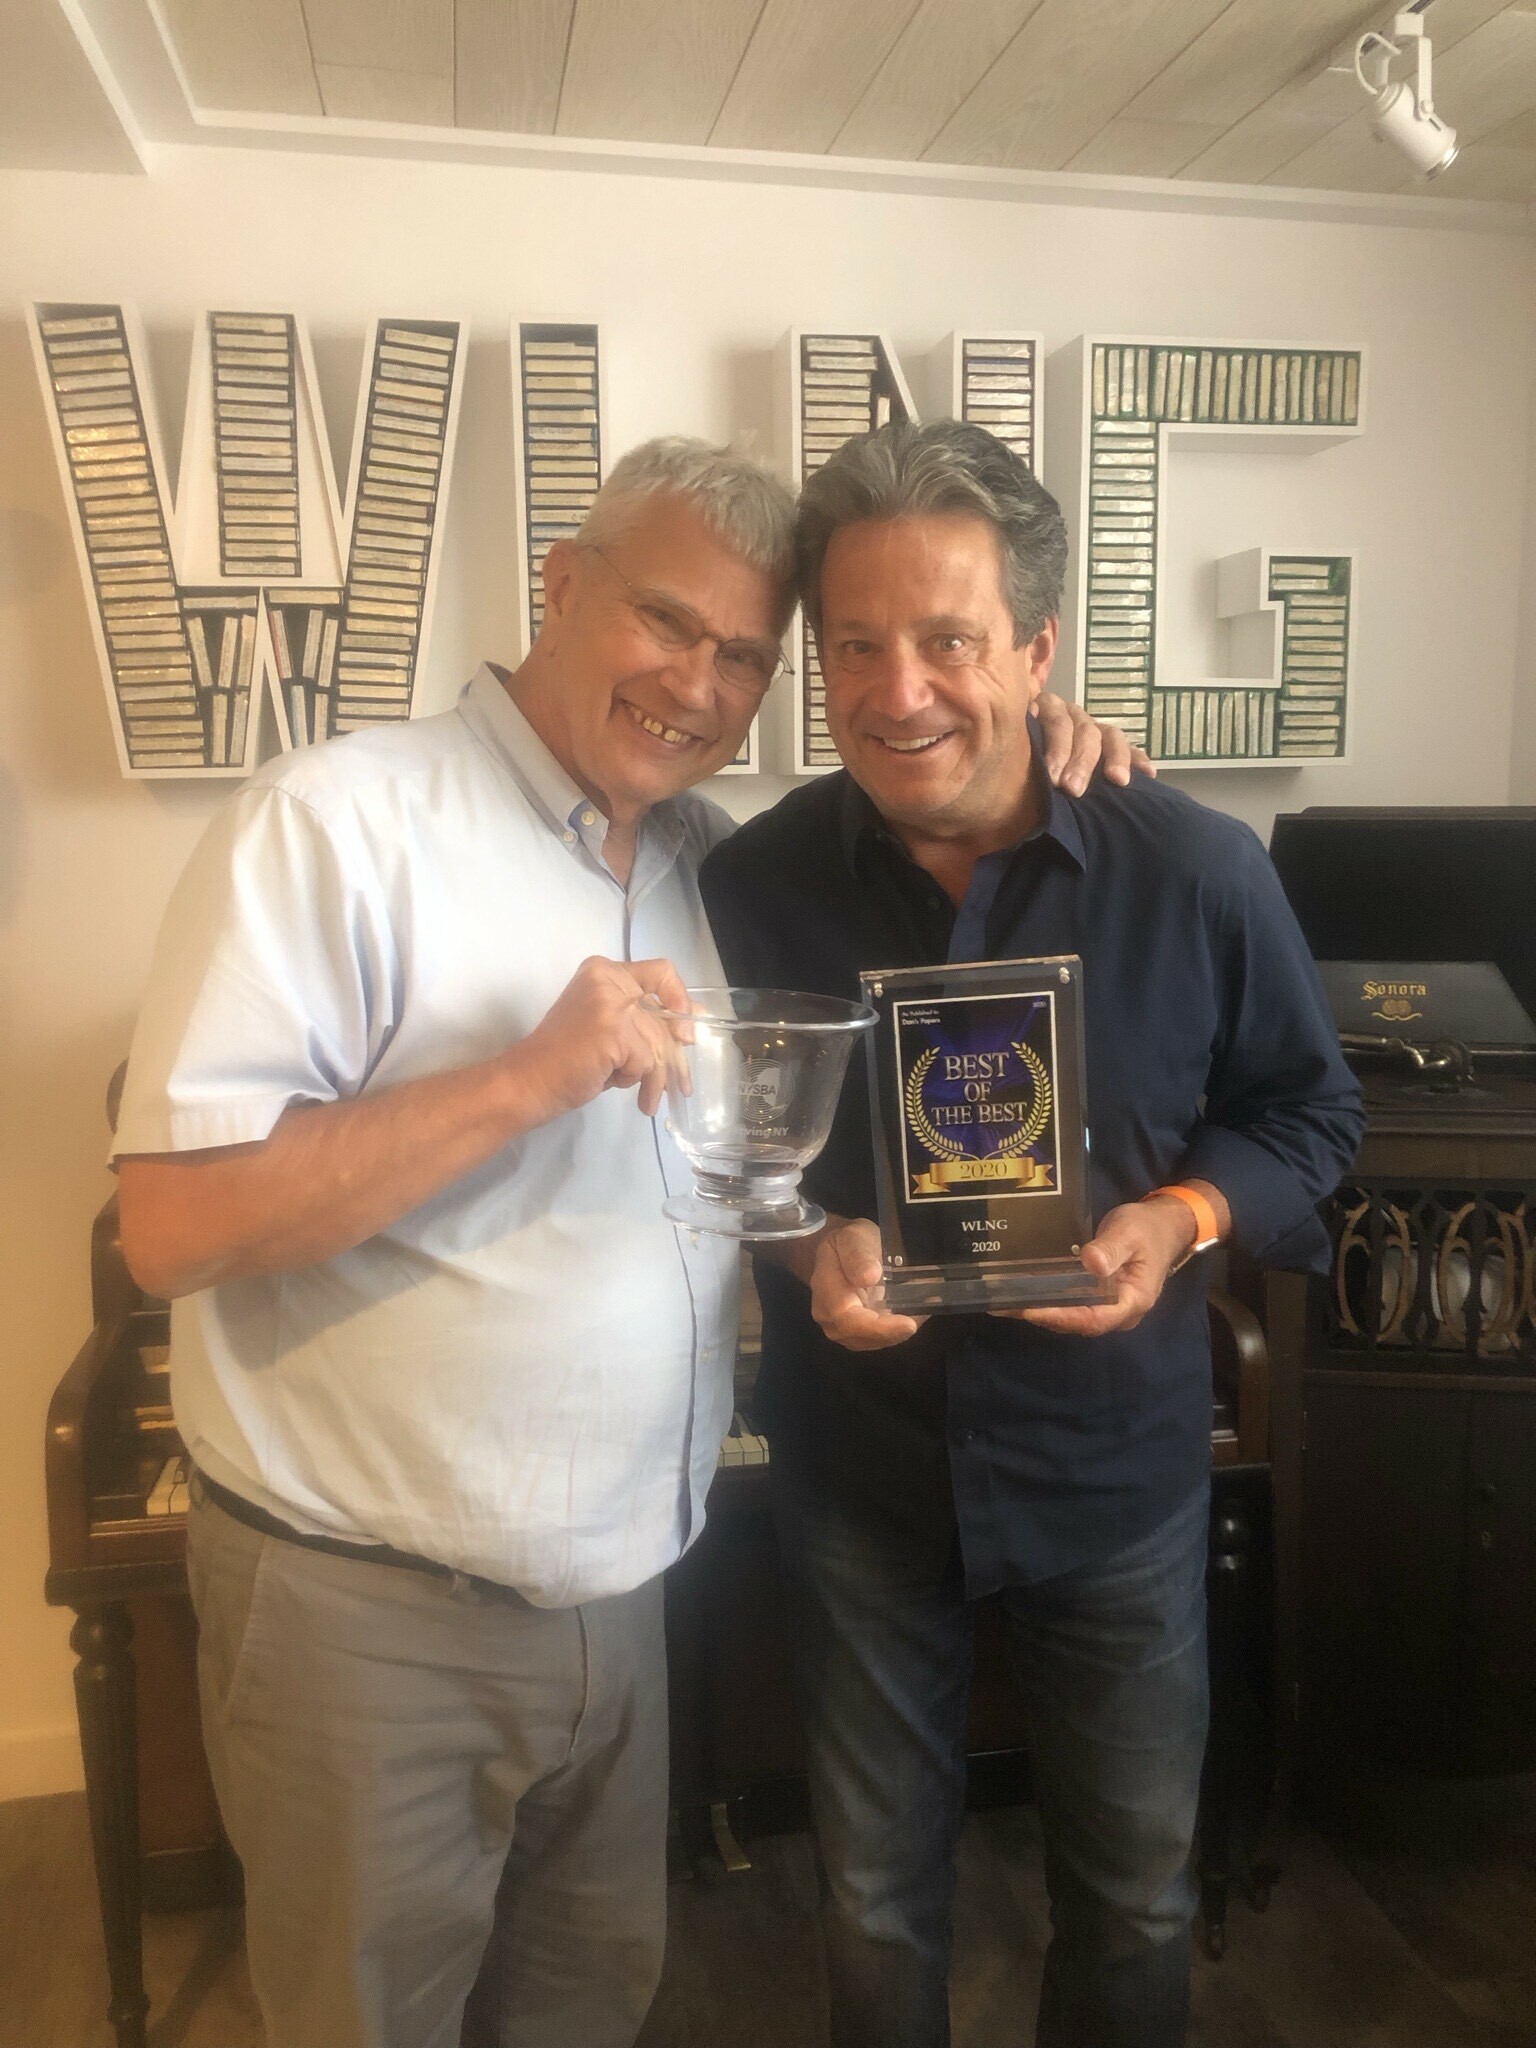 WLNG 92.1 FM deejay and general manager Gary Sapiane with Bill Evans, the station's owner, and a couple of their awards. COURTESY WLNG RADIO